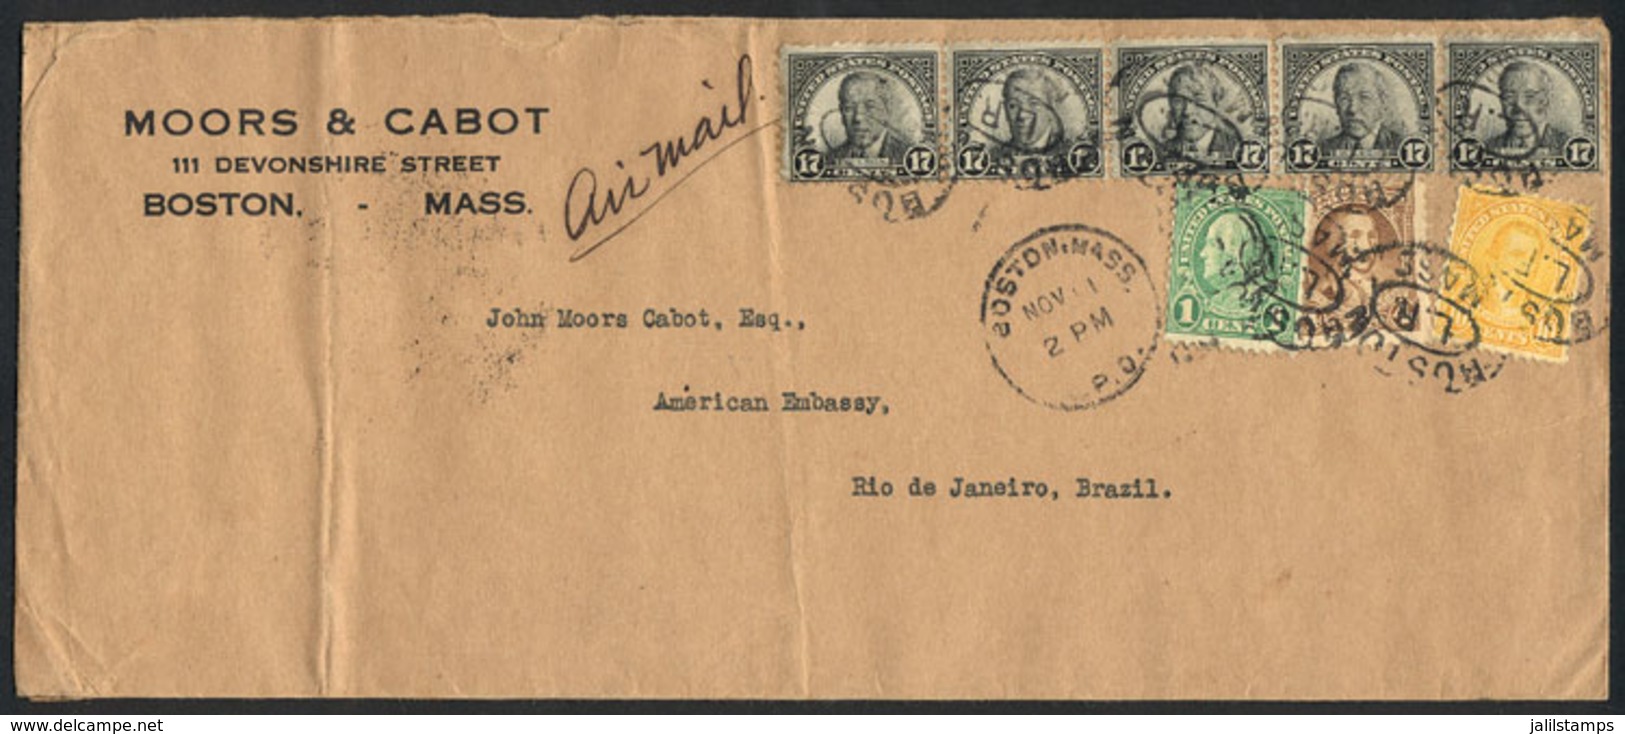 UNITED STATES: Airmail Cover Sent From Boston To Rio De Janeiro On 11/NO/1933, Nice Postage Of $1, VF Quality! - Marcophilie